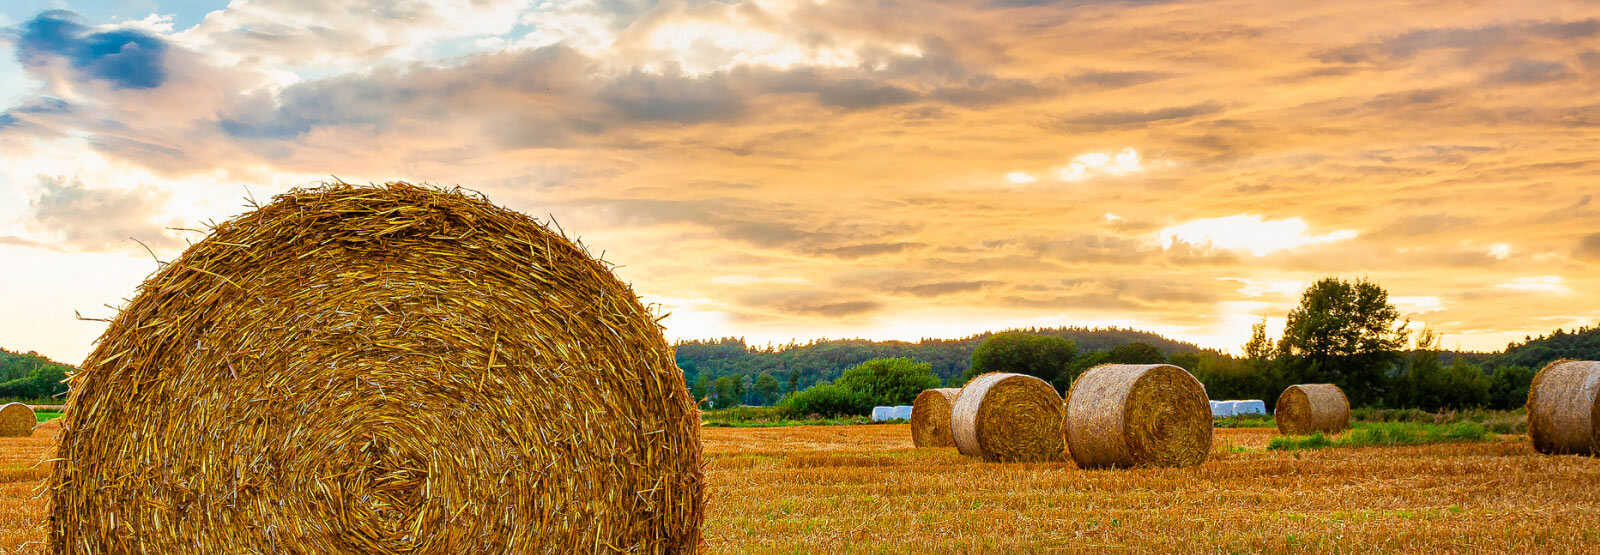 A field of hay bales 